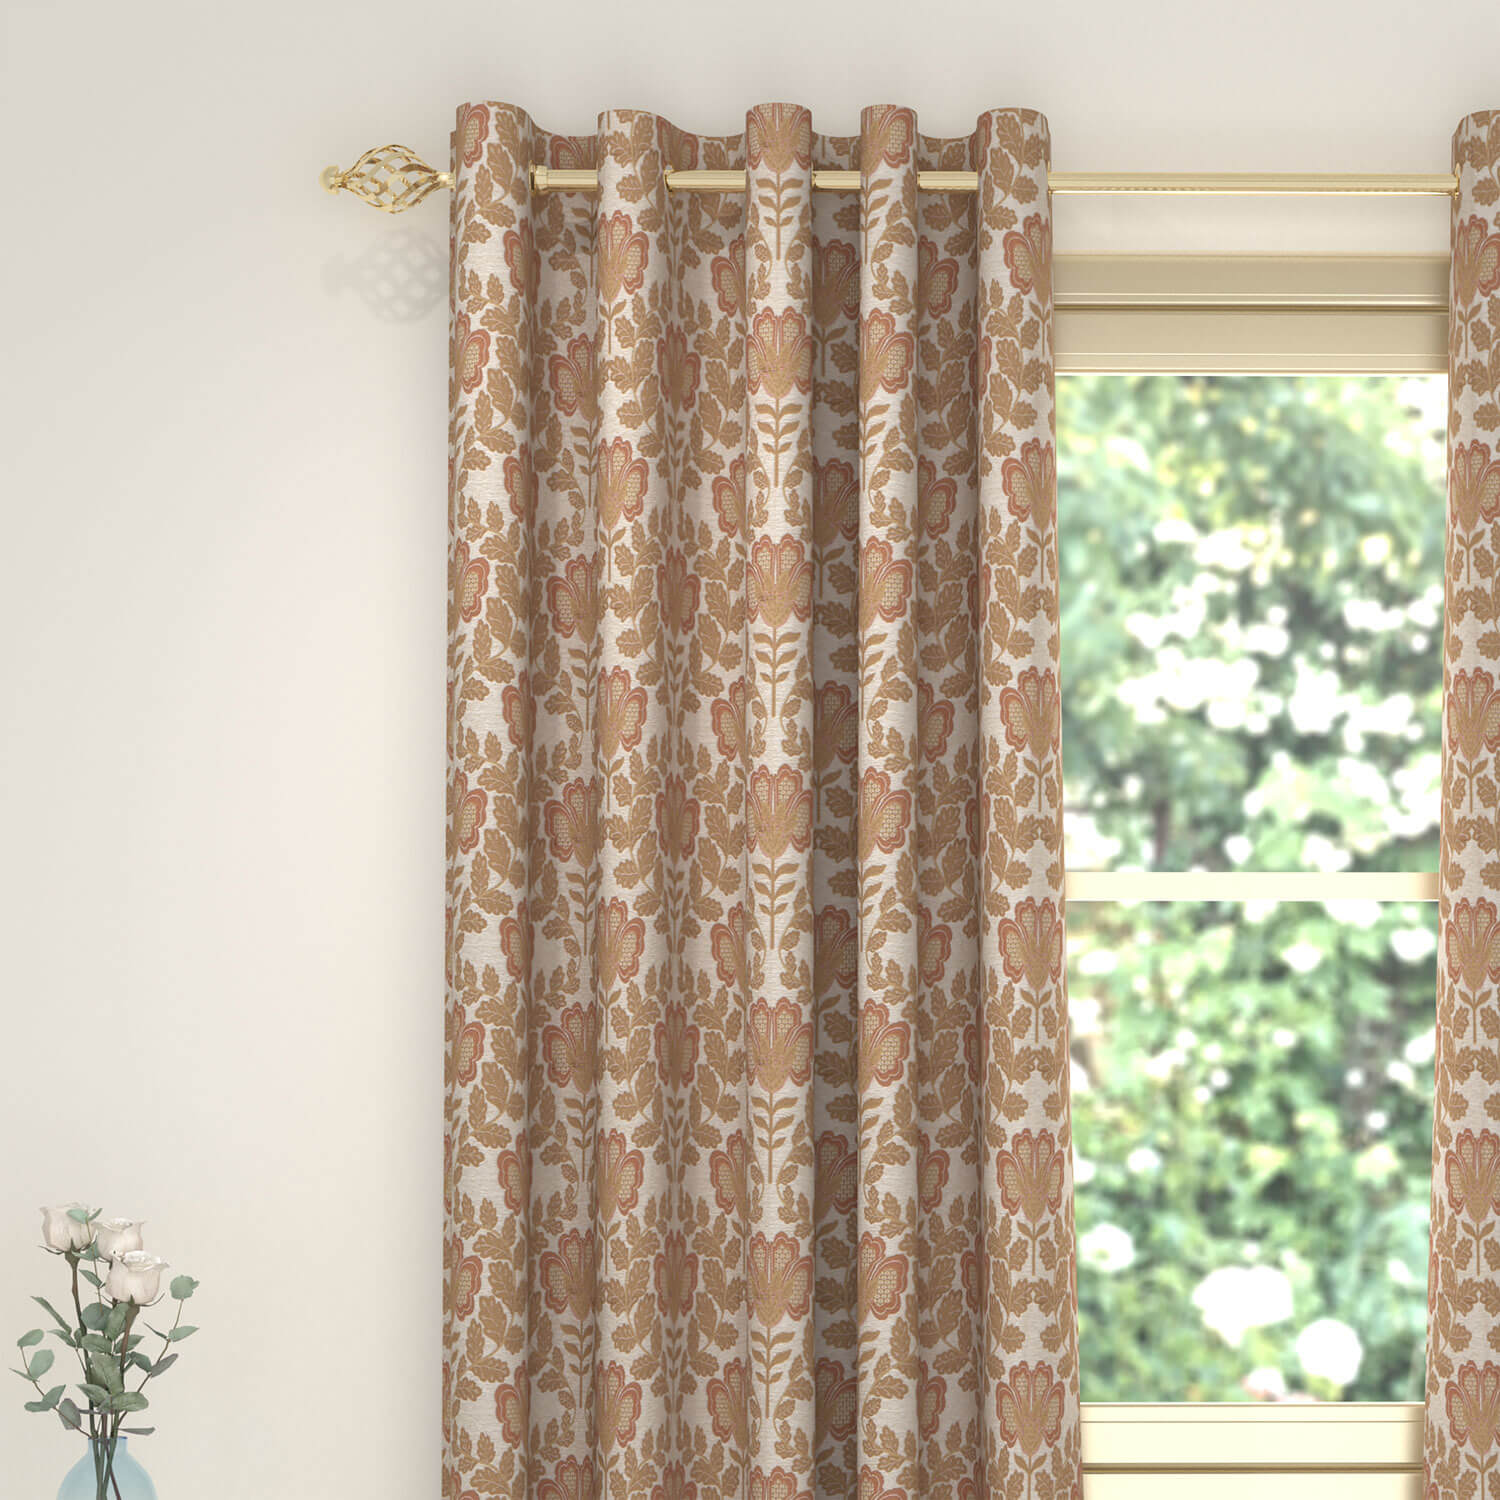 The Home Collection Bali Interline Readymade Curtain - 90x90 - Natural 1 Shaws Department Stores